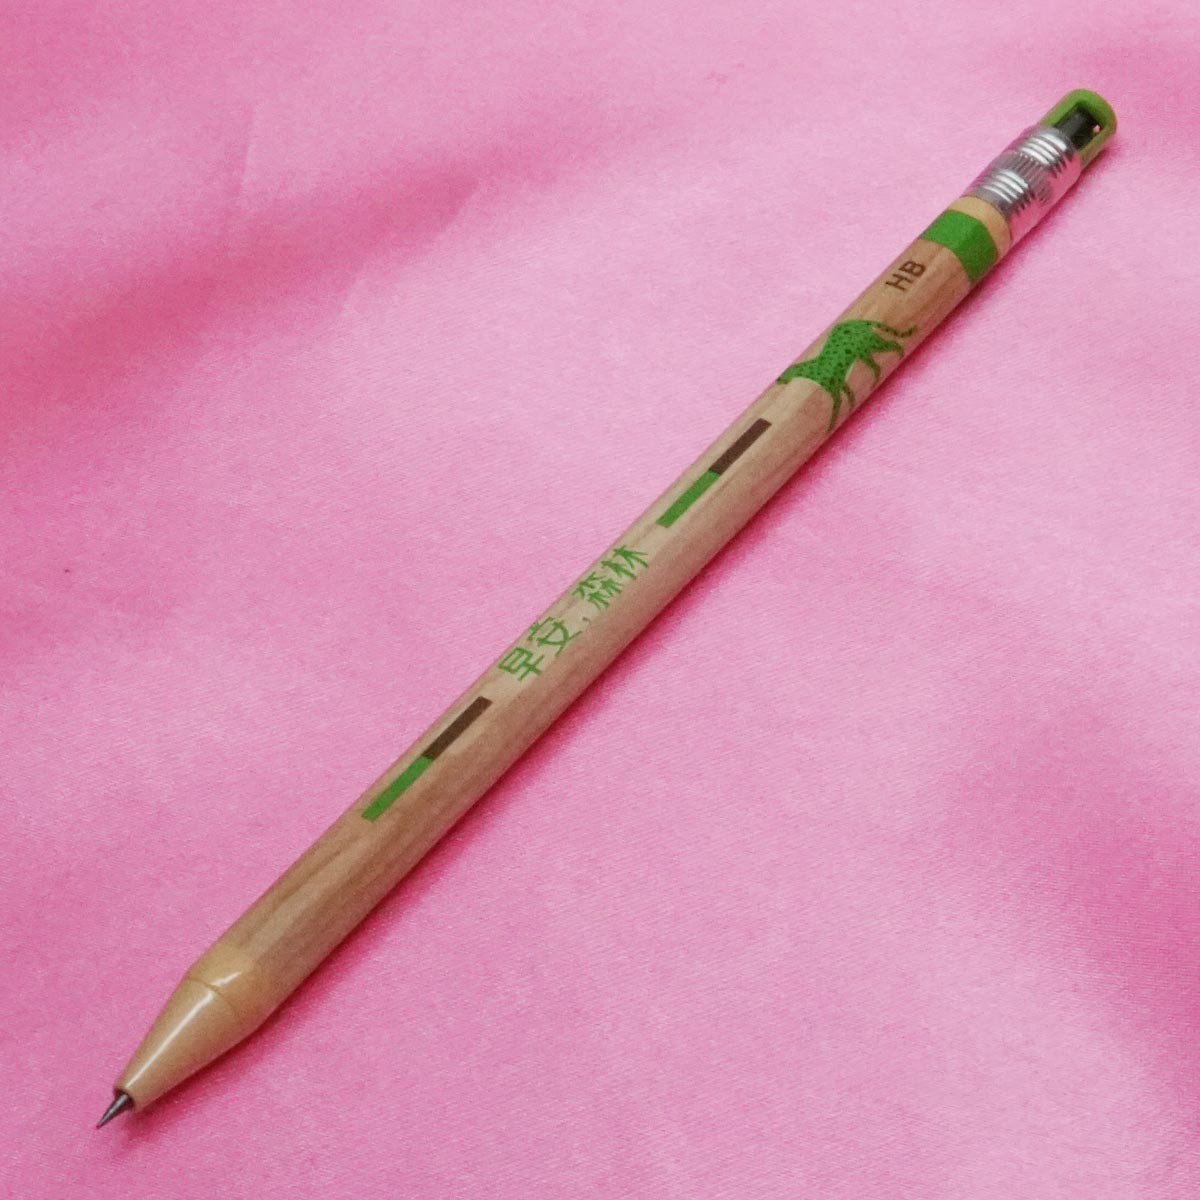 penhouse.in HB 2.0mm Wooden Finish Body Design With Green Color Click Led Pencil SKU 21520